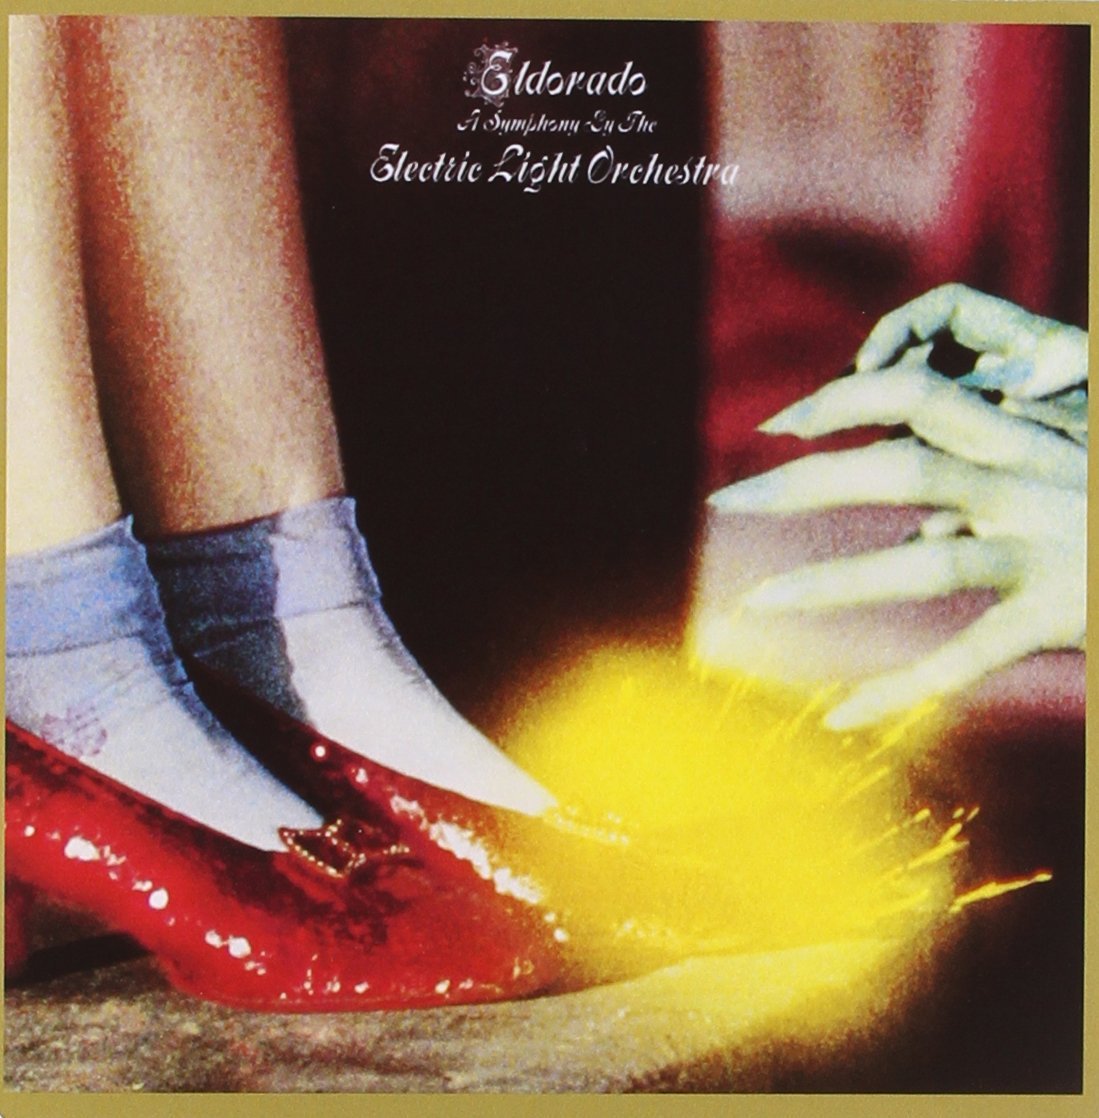 Single: Electric Light Orchestra (ELO) - Sweet Talkin' Woman / Fire On High  (Picture Sleeve)